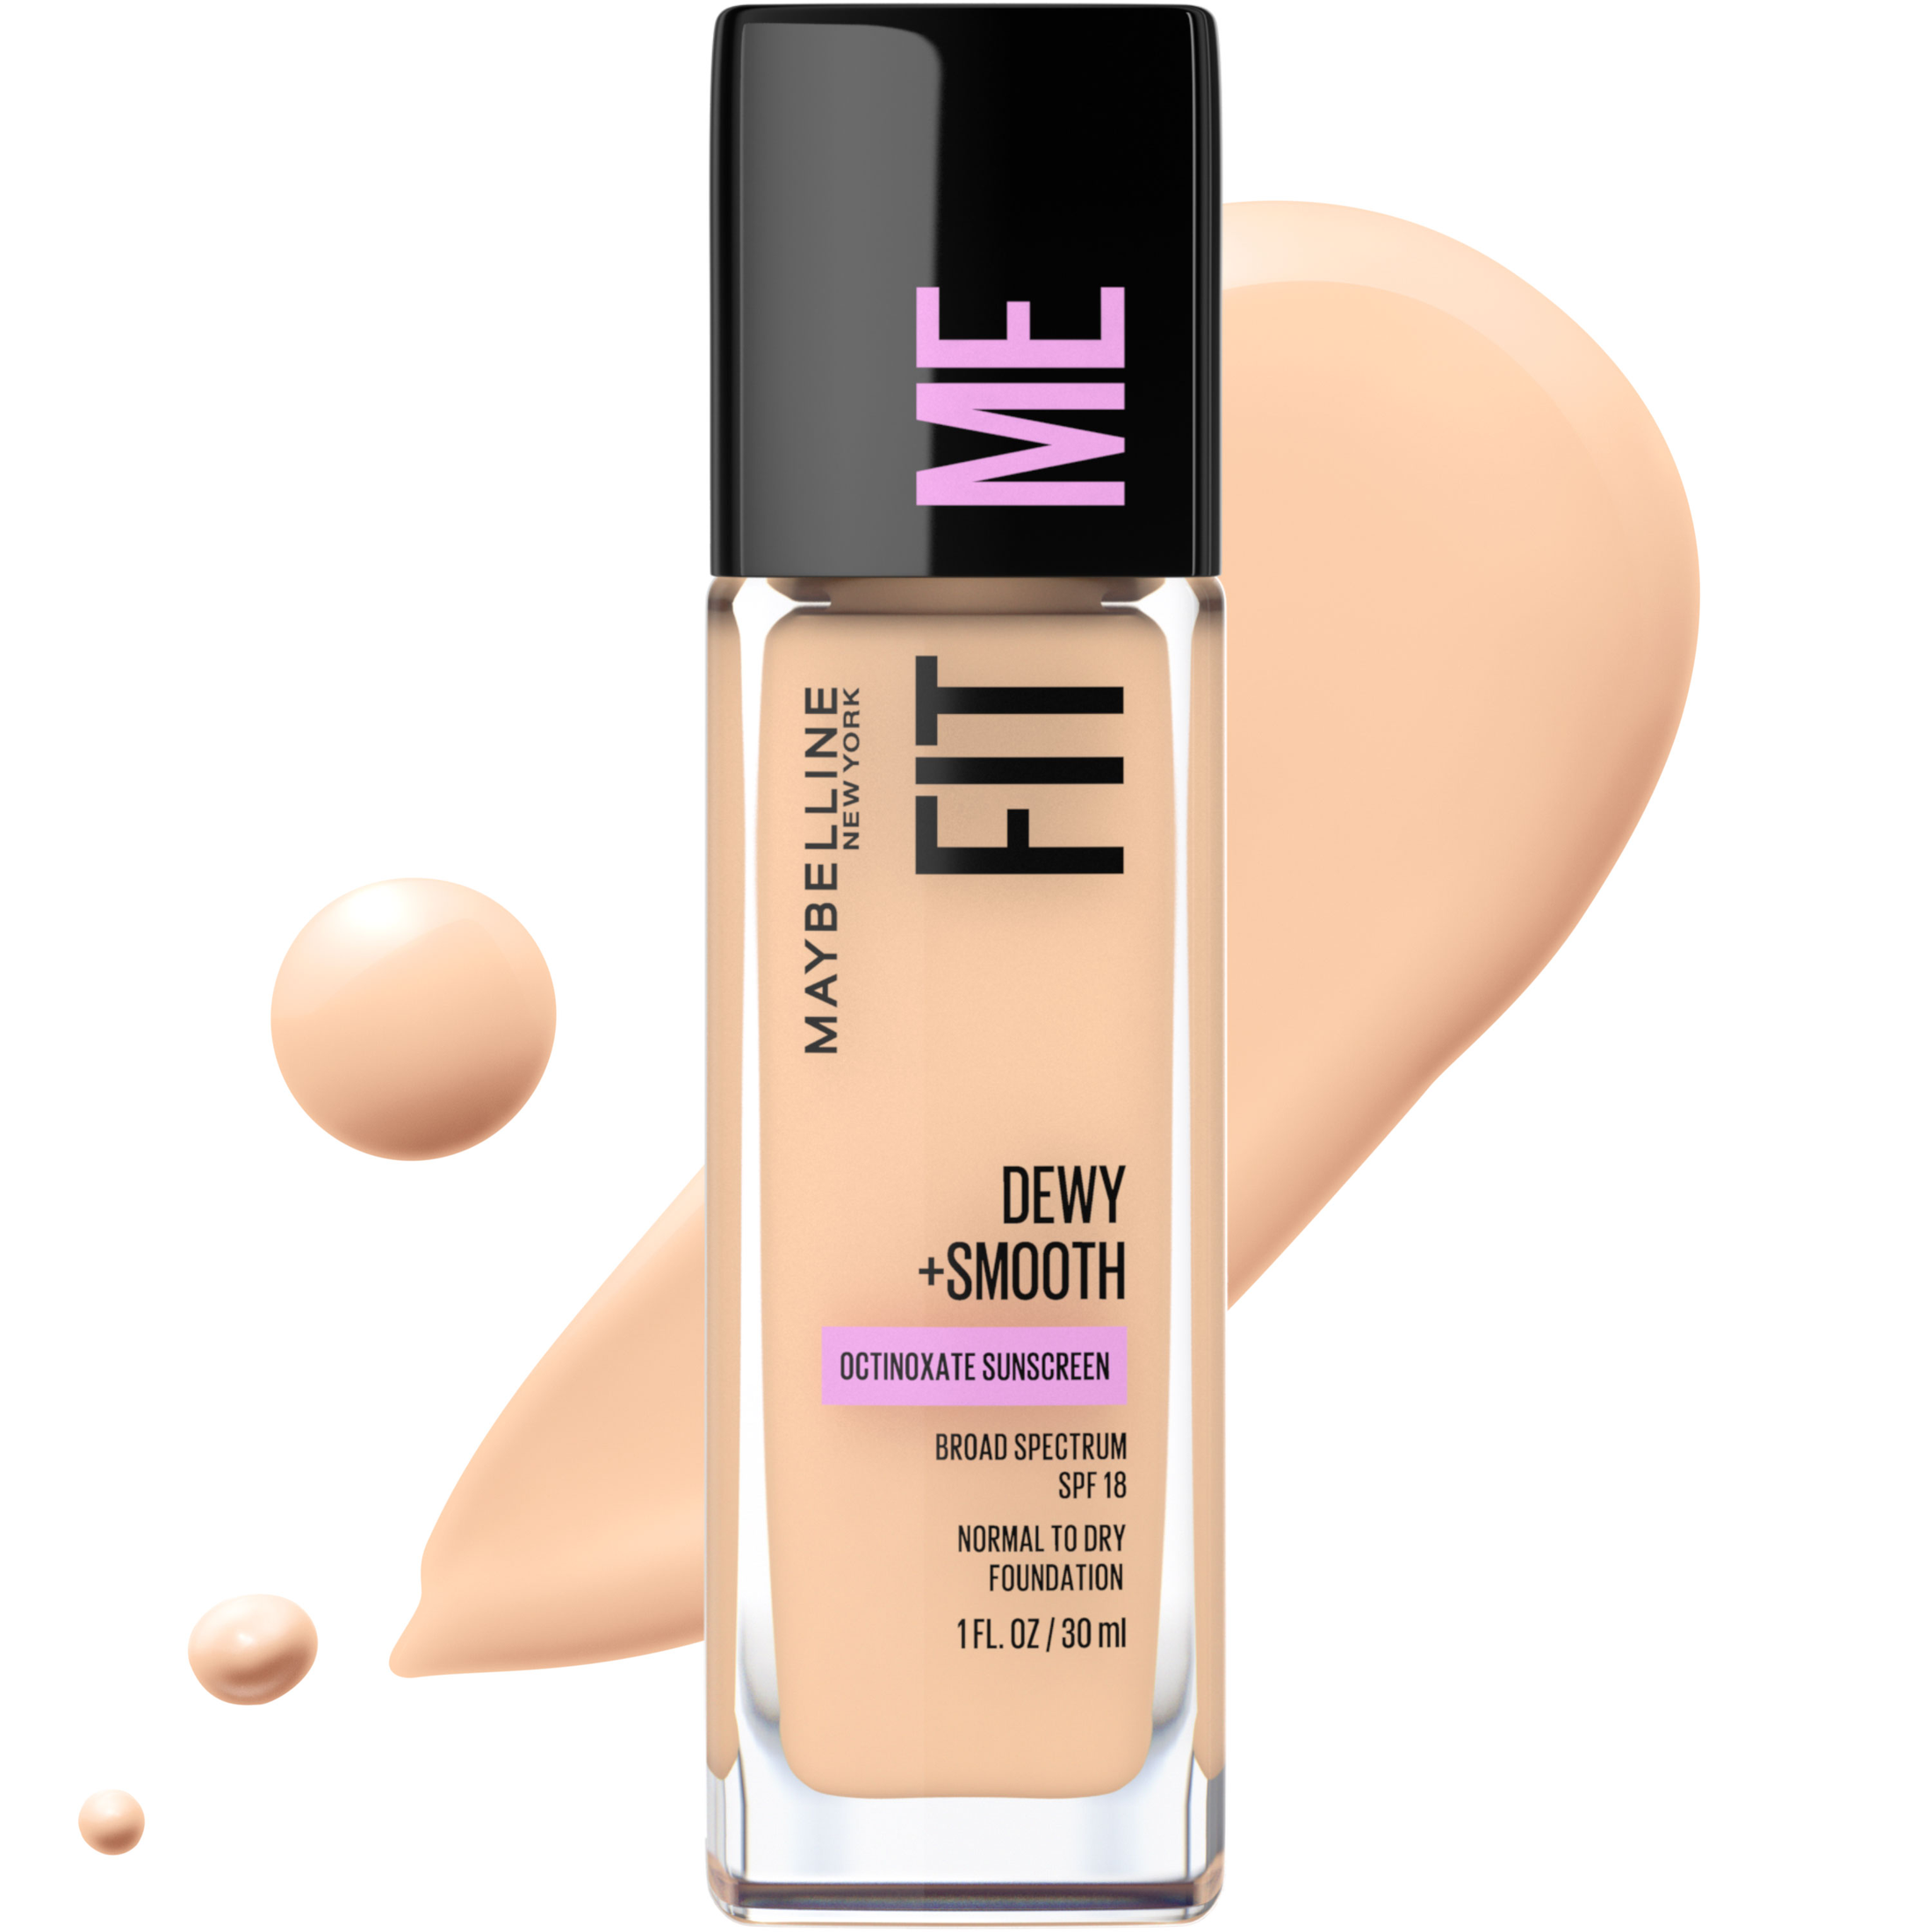 Maybelline Fit Me Dewy and Smooth Liquid Foundation Makeup, 110 Porcelain, 1 fl oz - image 1 of 9